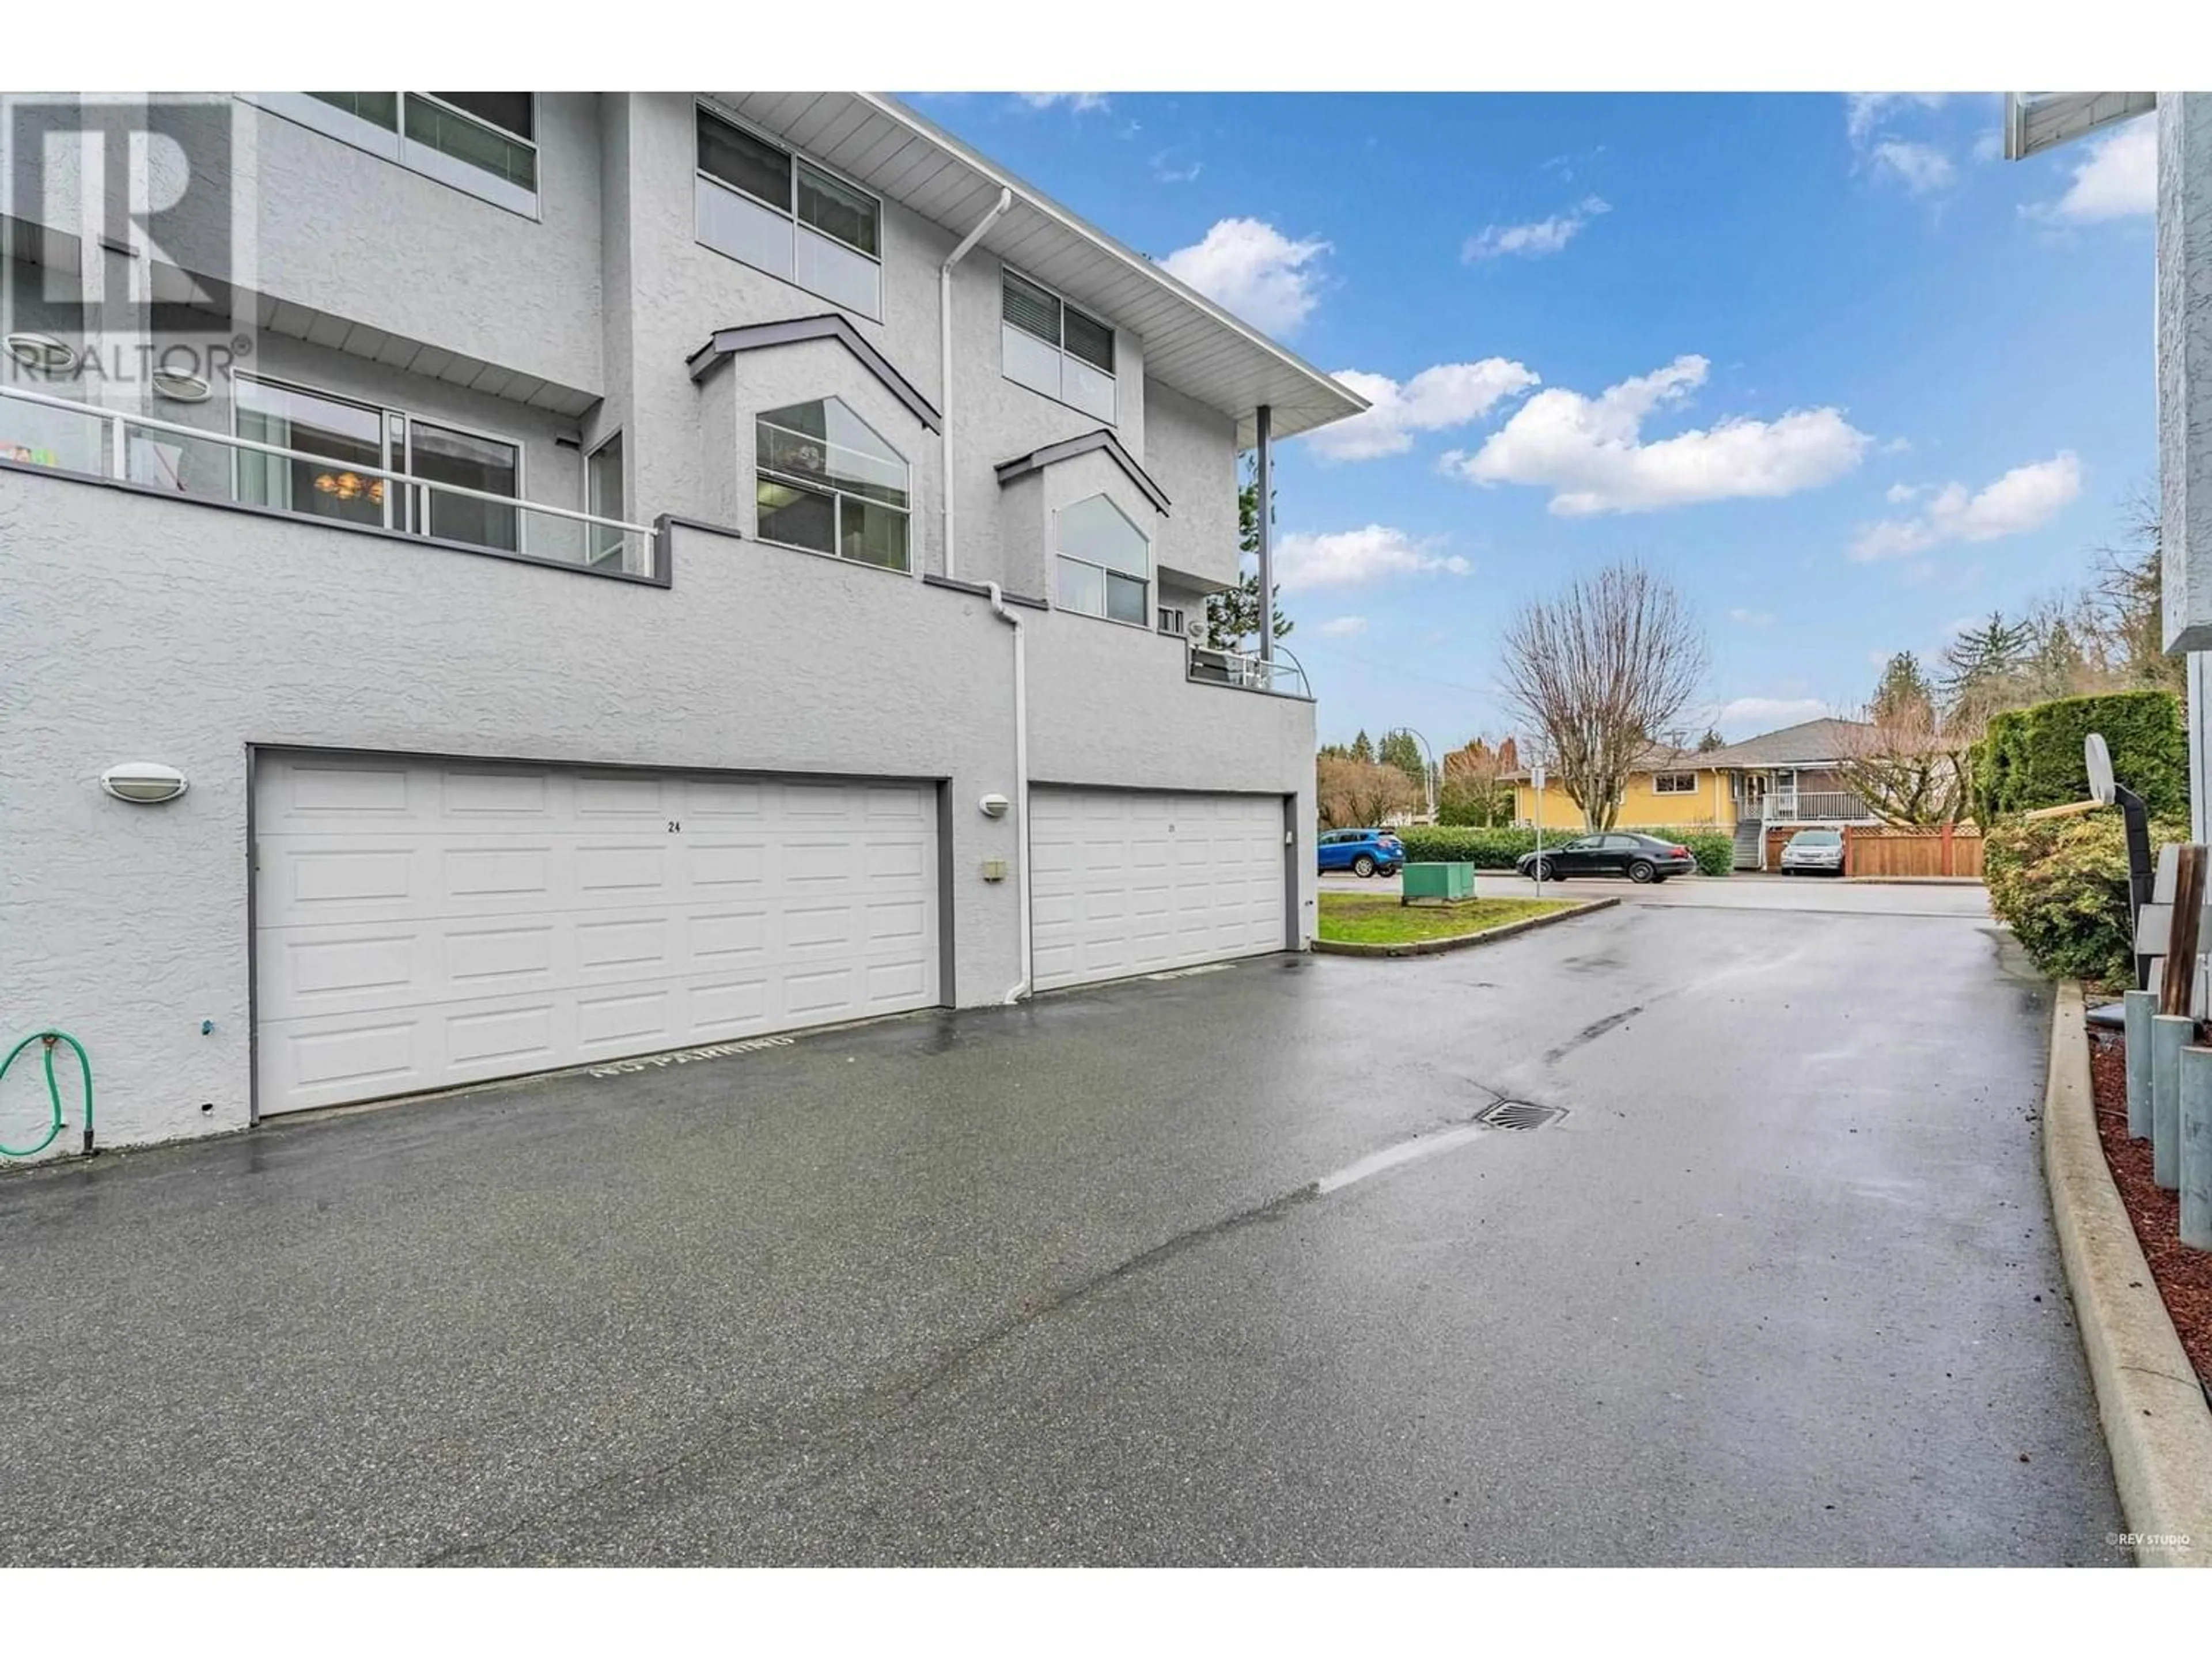 A pic from exterior of the house or condo for 24 3476 COAST MERDIAN ROAD, Port Coquitlam British Columbia V3B7H6